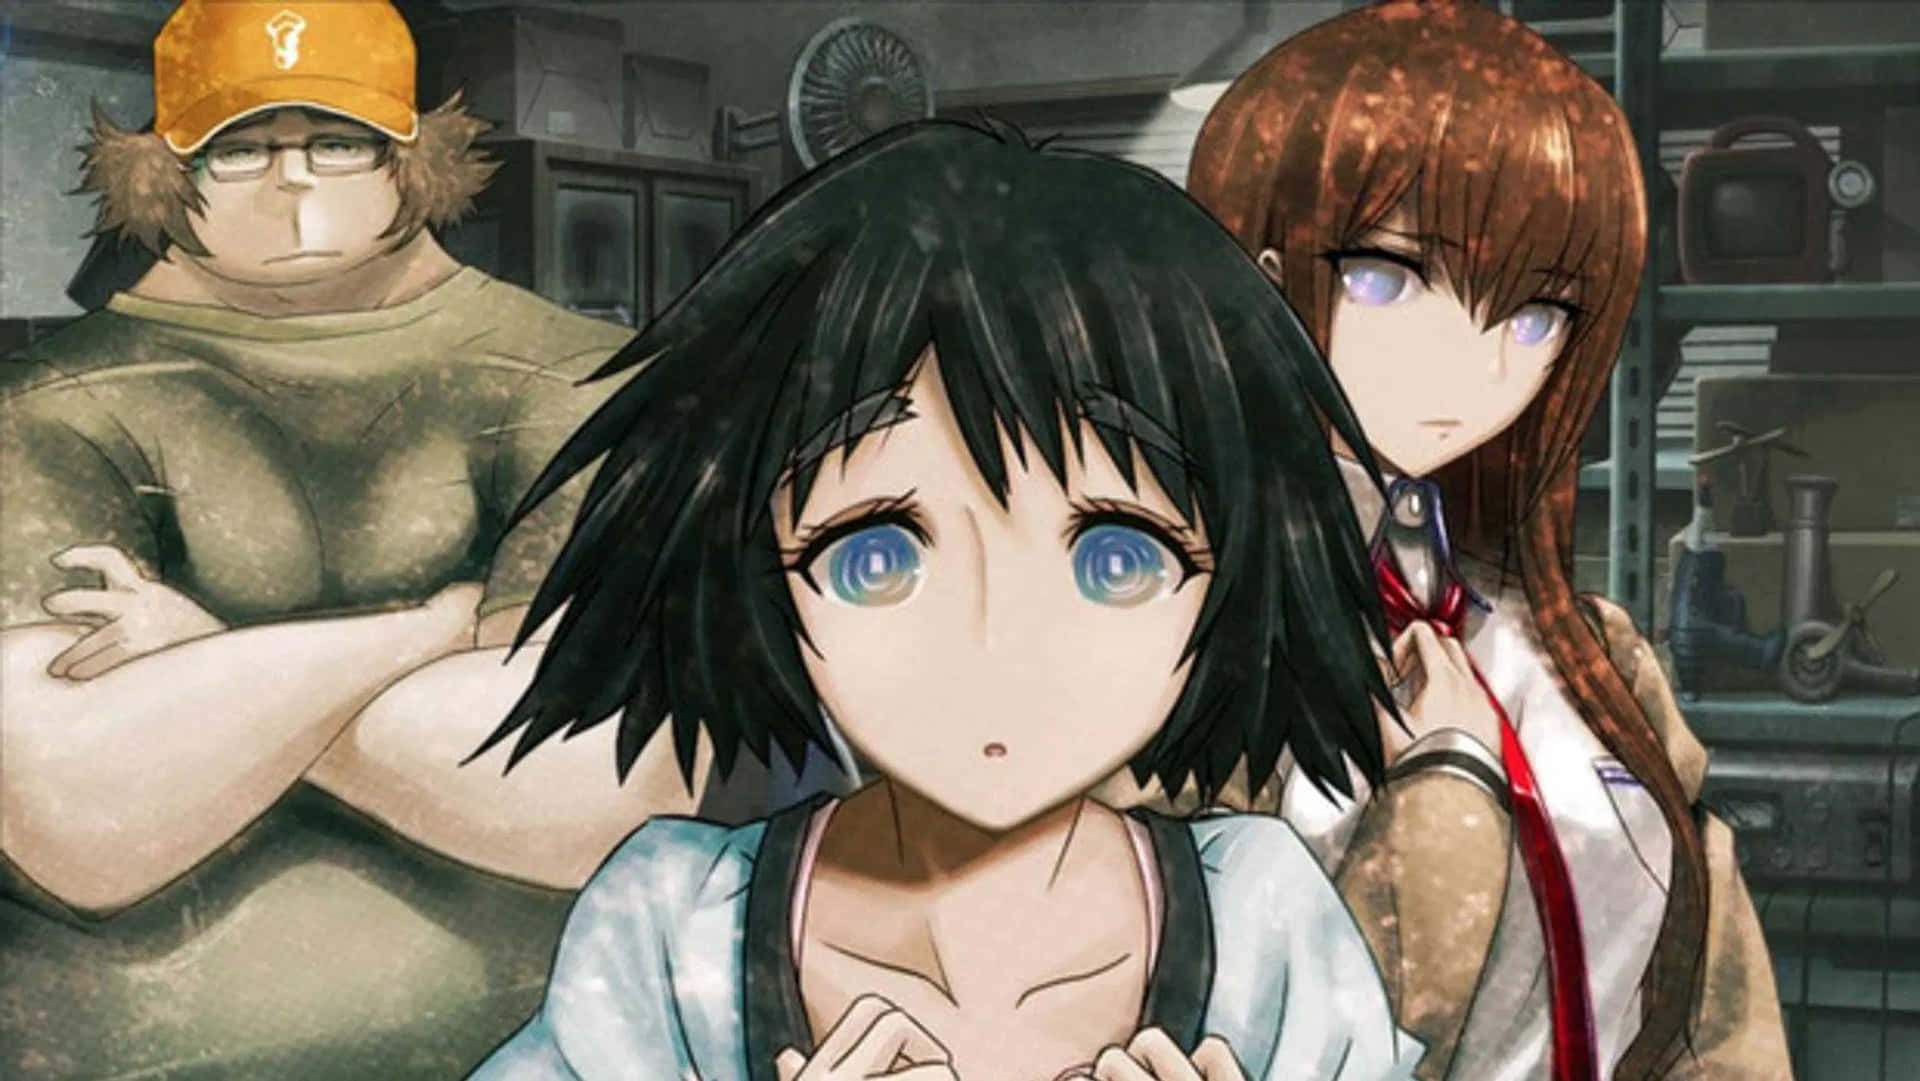 Experience the world of Steins Gate